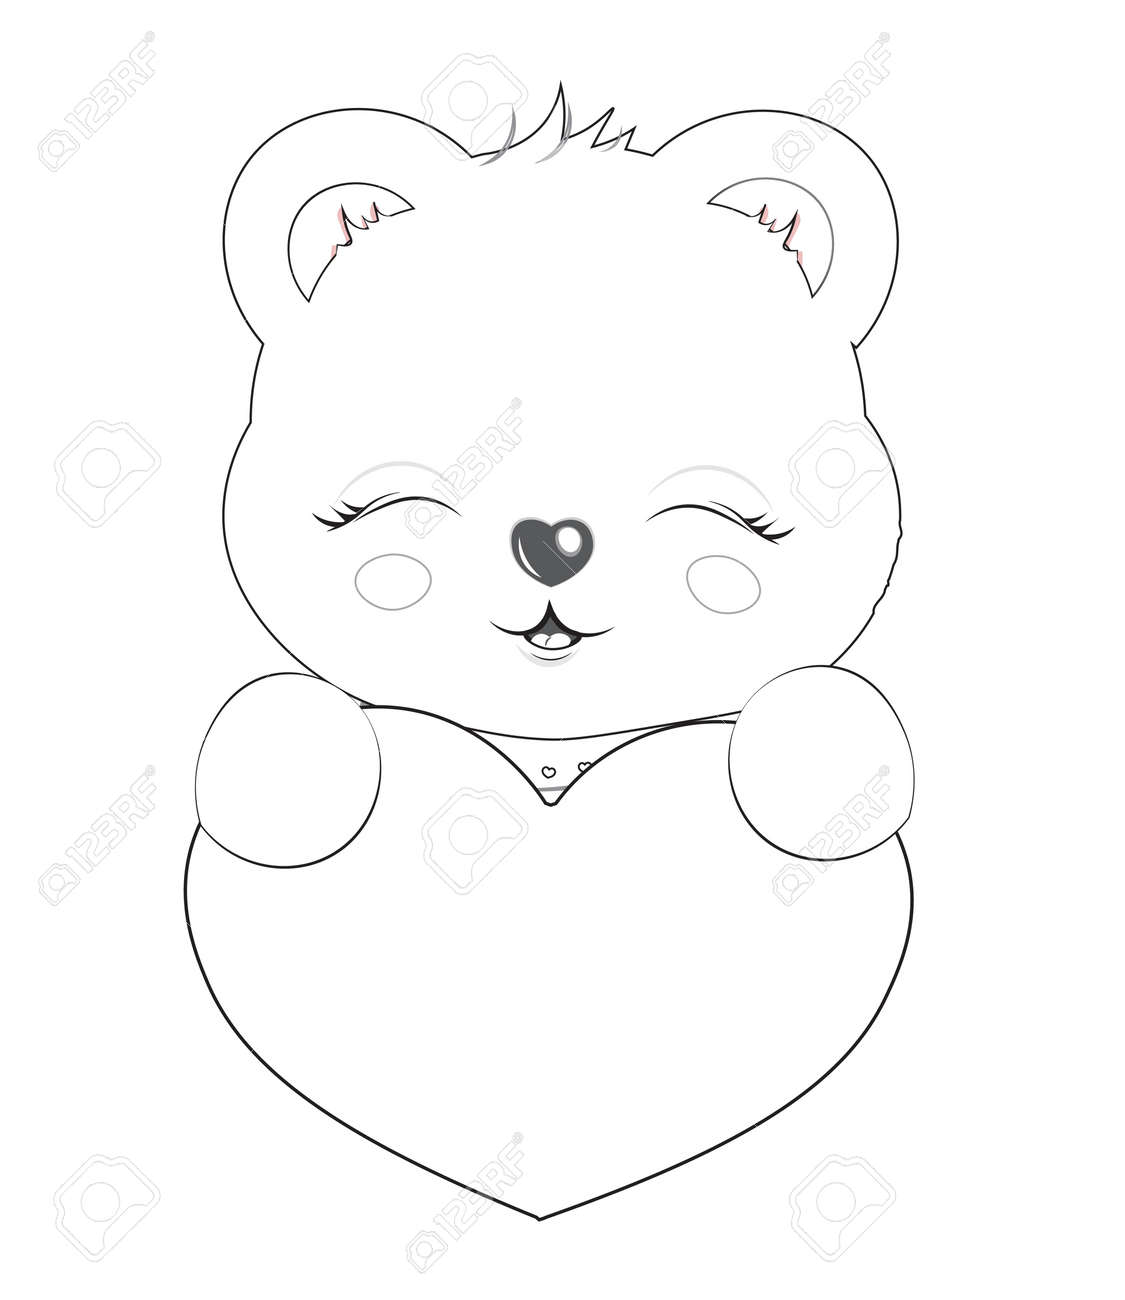 Valentines day card boy teddy bear woth heart coloring book picture in hand drawing cartoon style for greeting royalty free svg cliparts vectors and stock illustration image